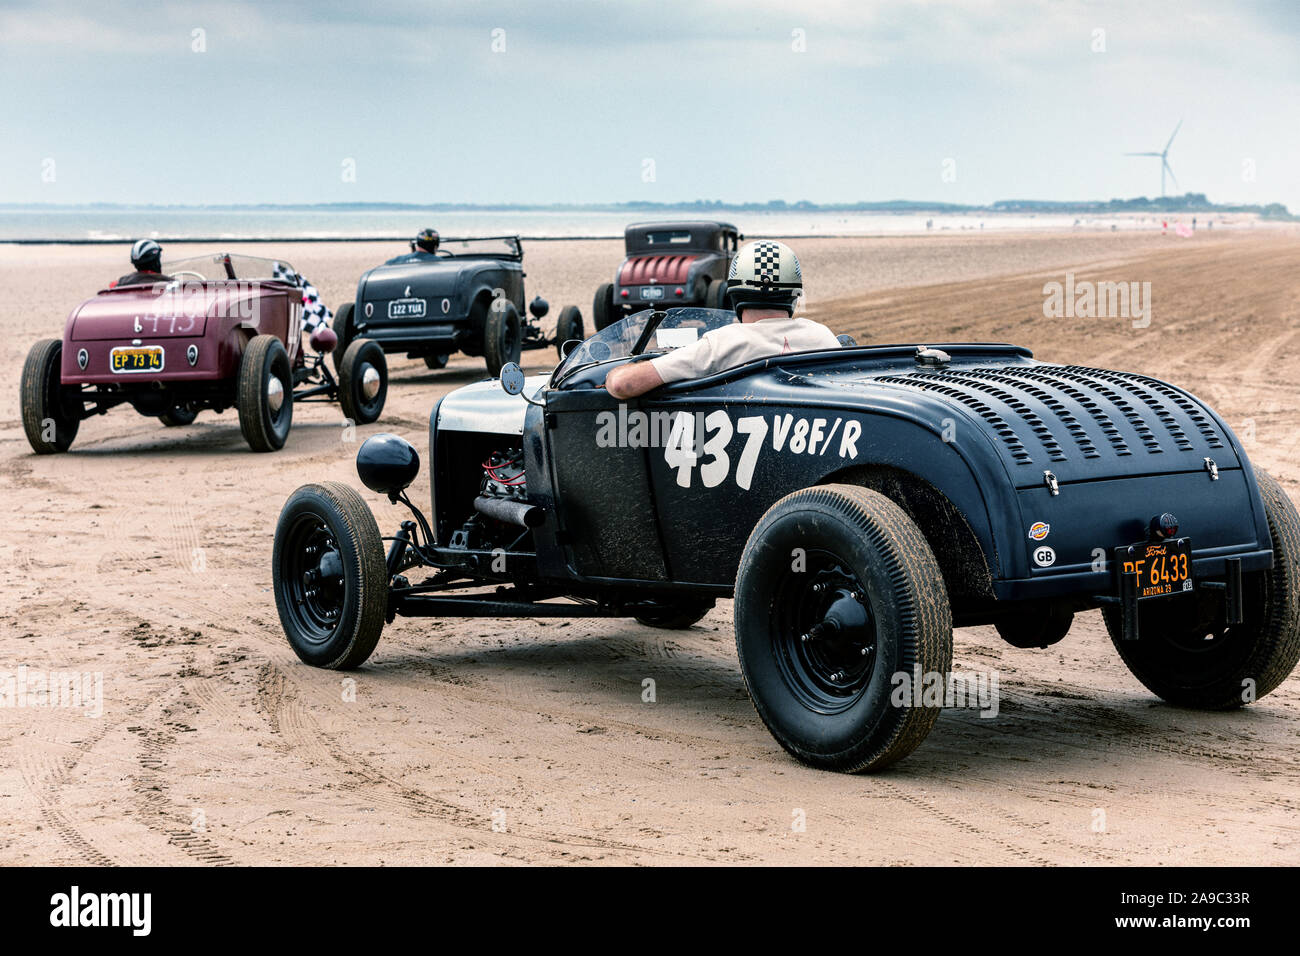 Vintage hot rods line up at the 'Race the Waves' event, where cars and motorcycles drag race on the beach at Bridlington, East Yorkshire England UK Stock Photo